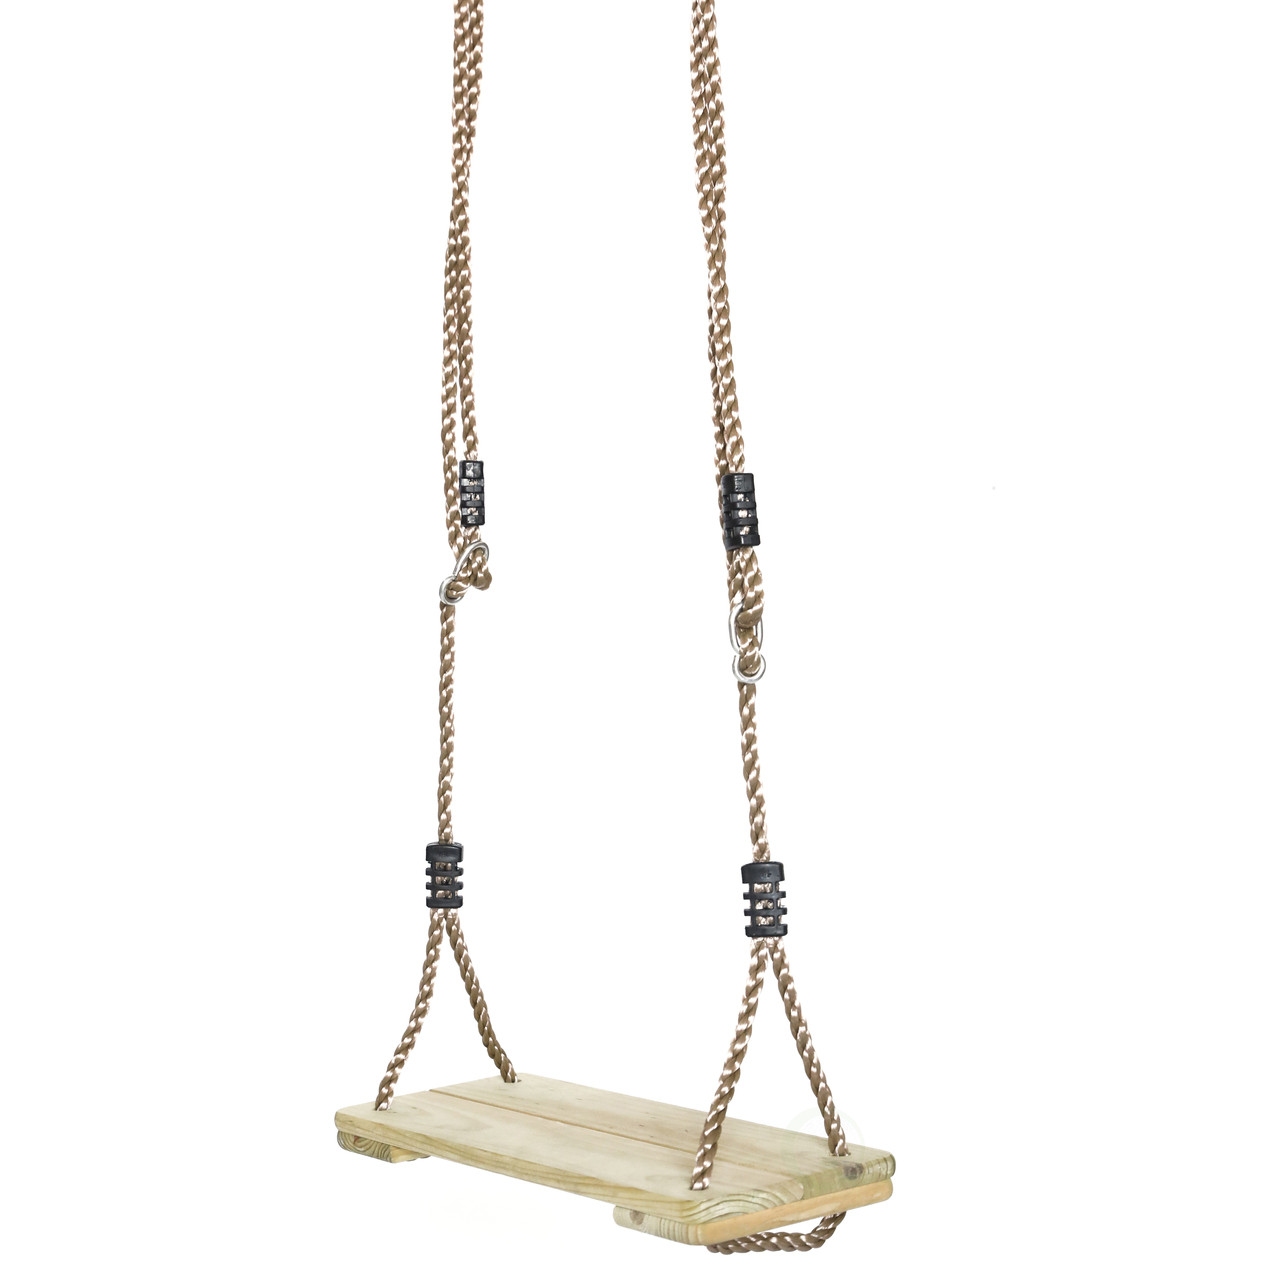 Outdoor Wooden Tree Swing with Hanging Ropes - PLAYBERG